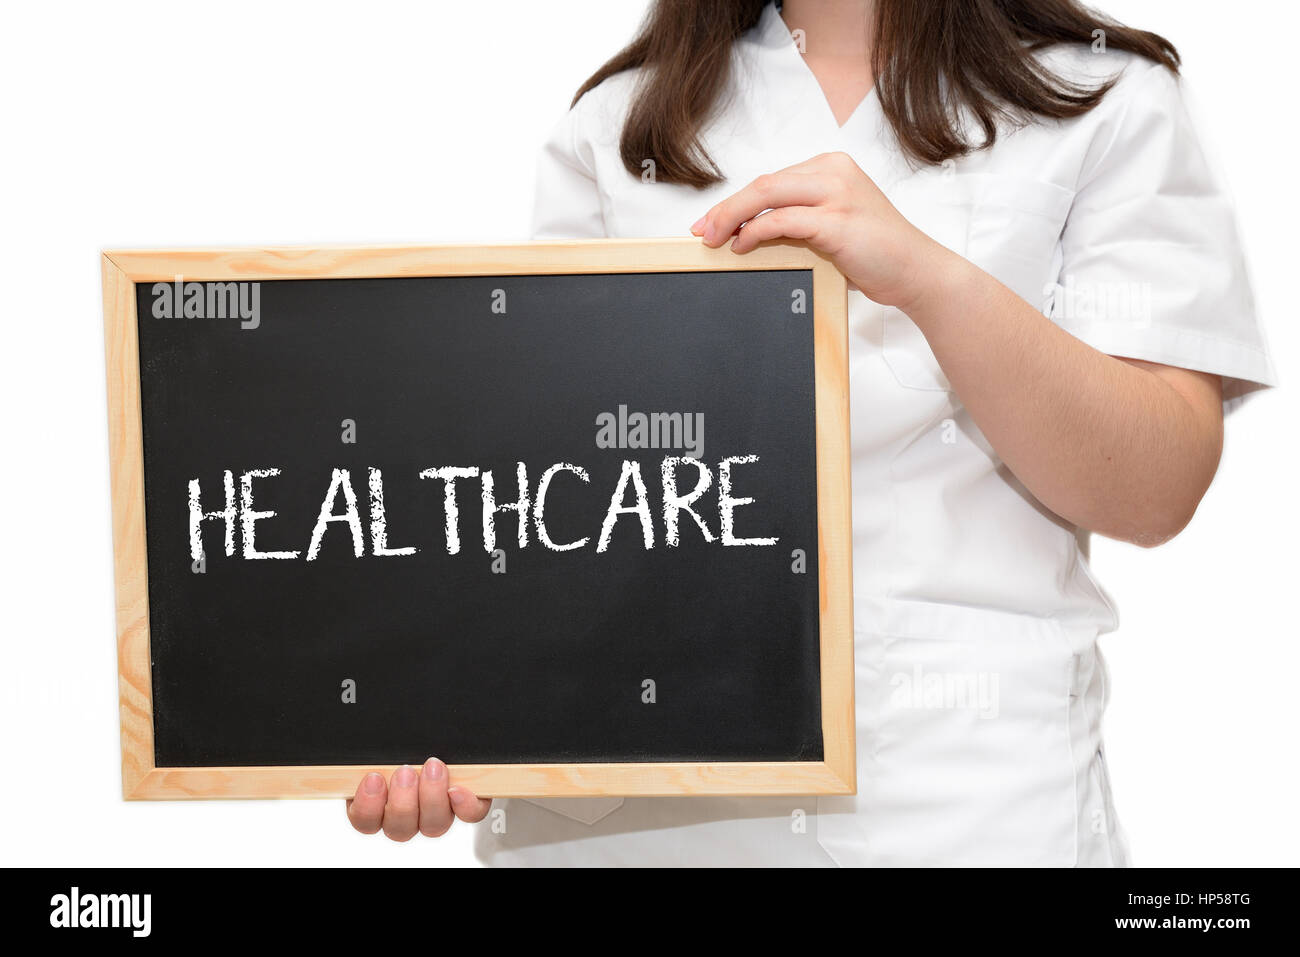 Female nurse holding a slate board with the text Healthcare written with chalk, isolated on white background. Stock Photo